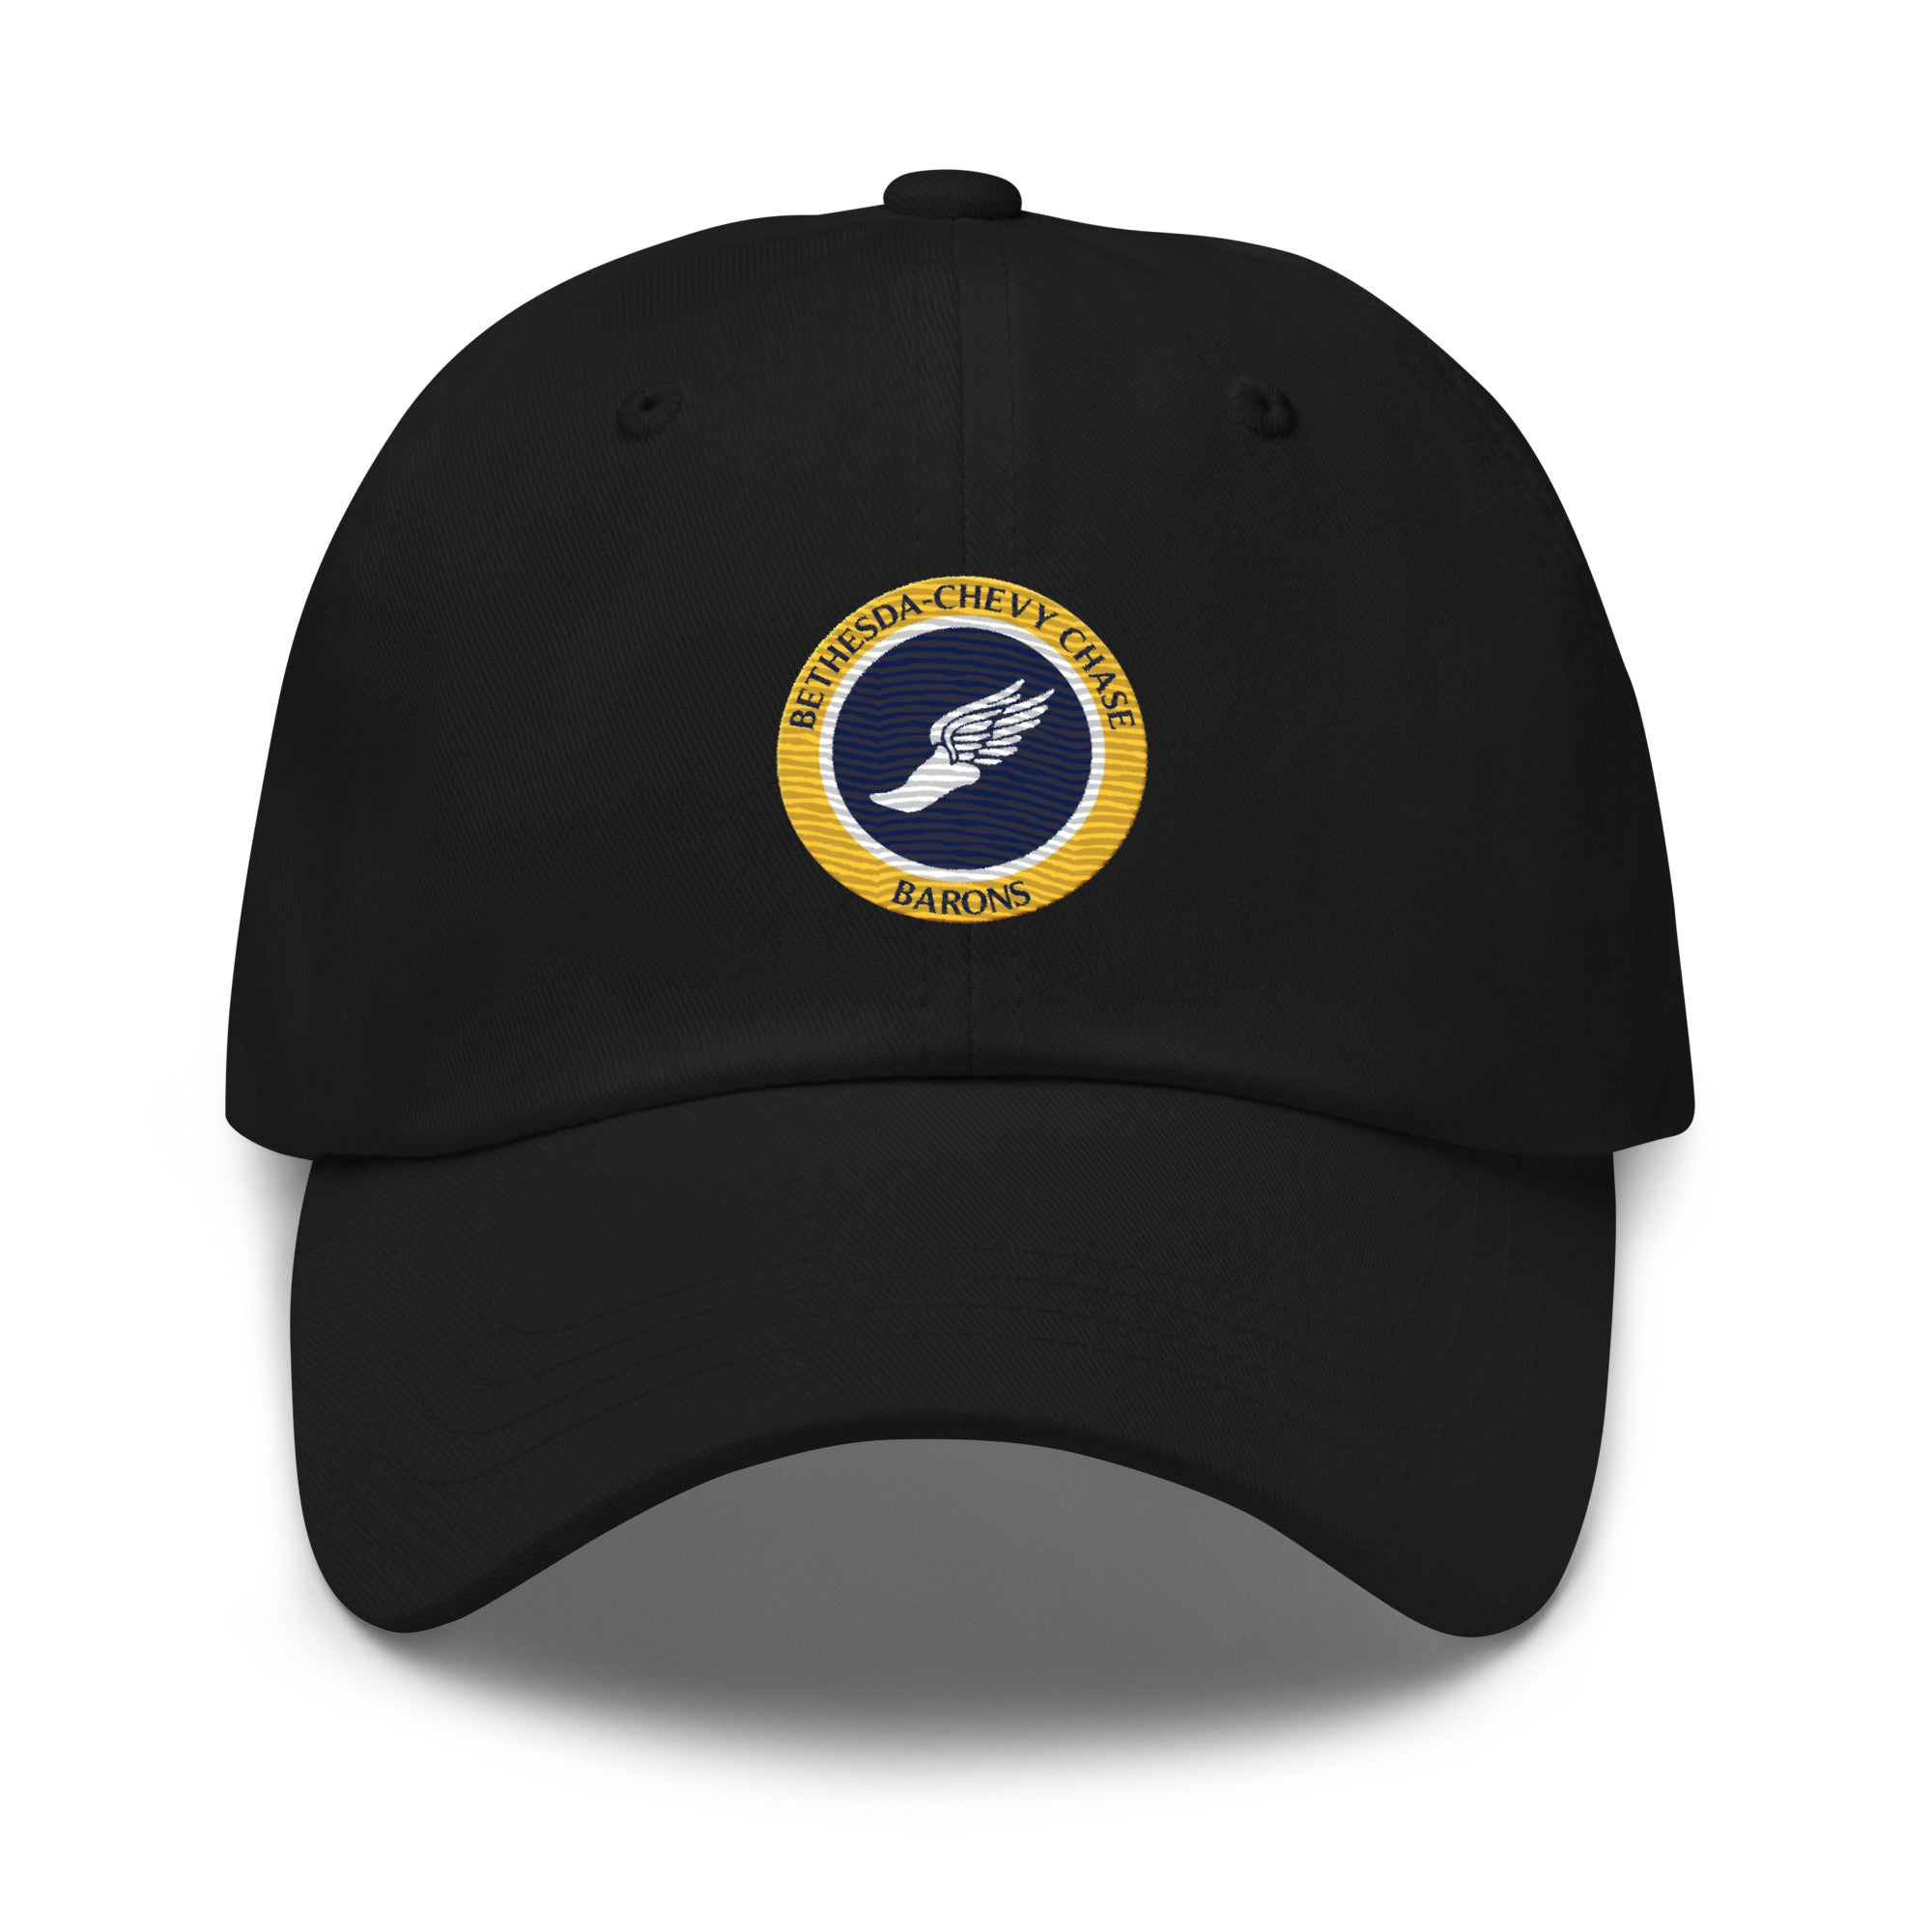 Bethesda Chevy Chase Dad hat